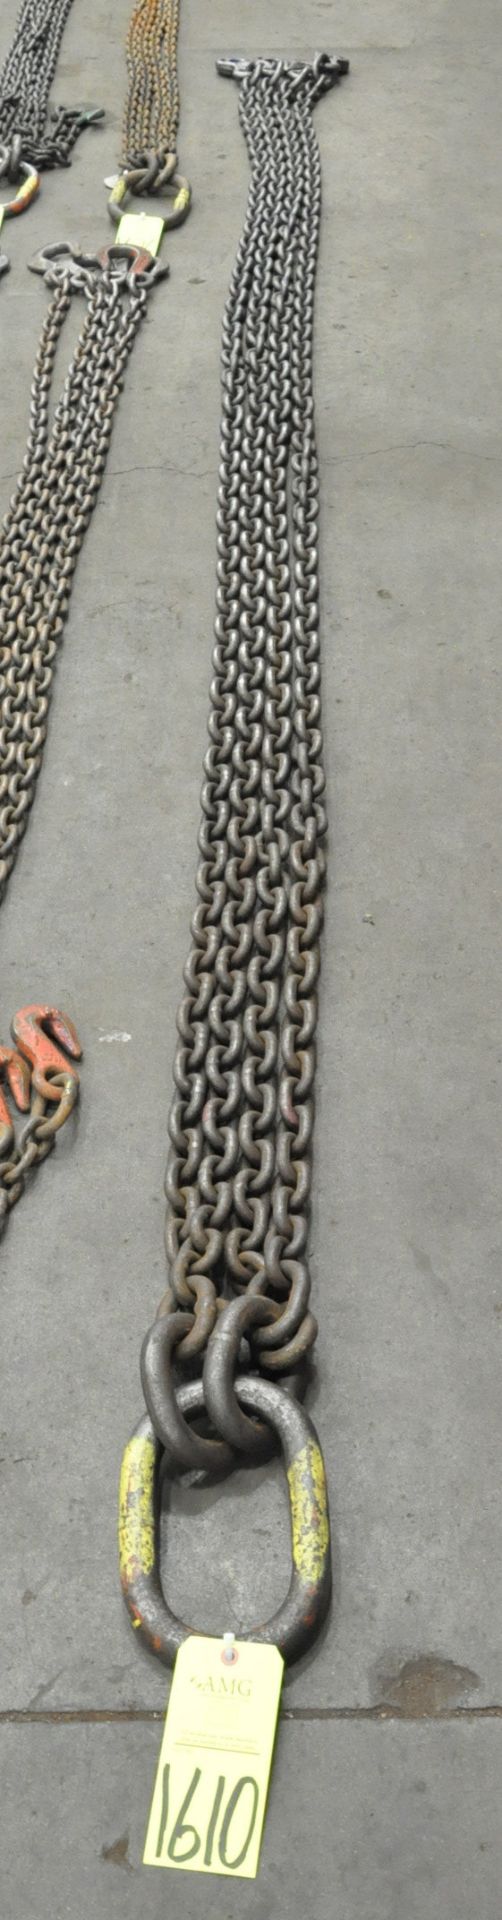 1/2" Link x 13' Long 4-Hook Chain Sling, Cert Tag, (G-23), (Yellow Tag)